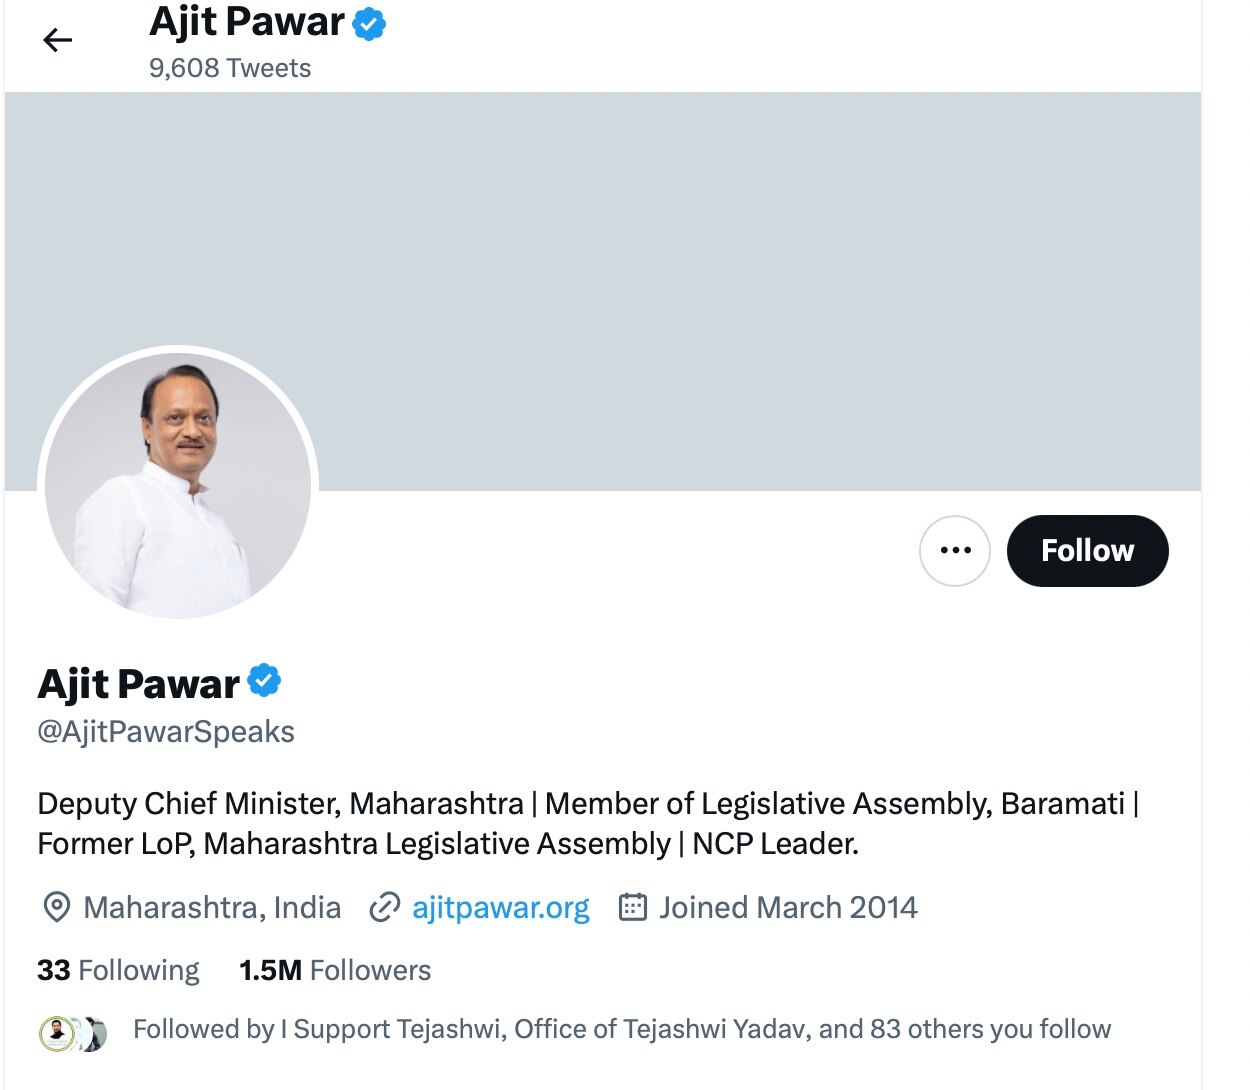 Ajit Pawar Updates Twitter Bio To 'Deputy Chief Minister, Maharashtra' After Joining State Government